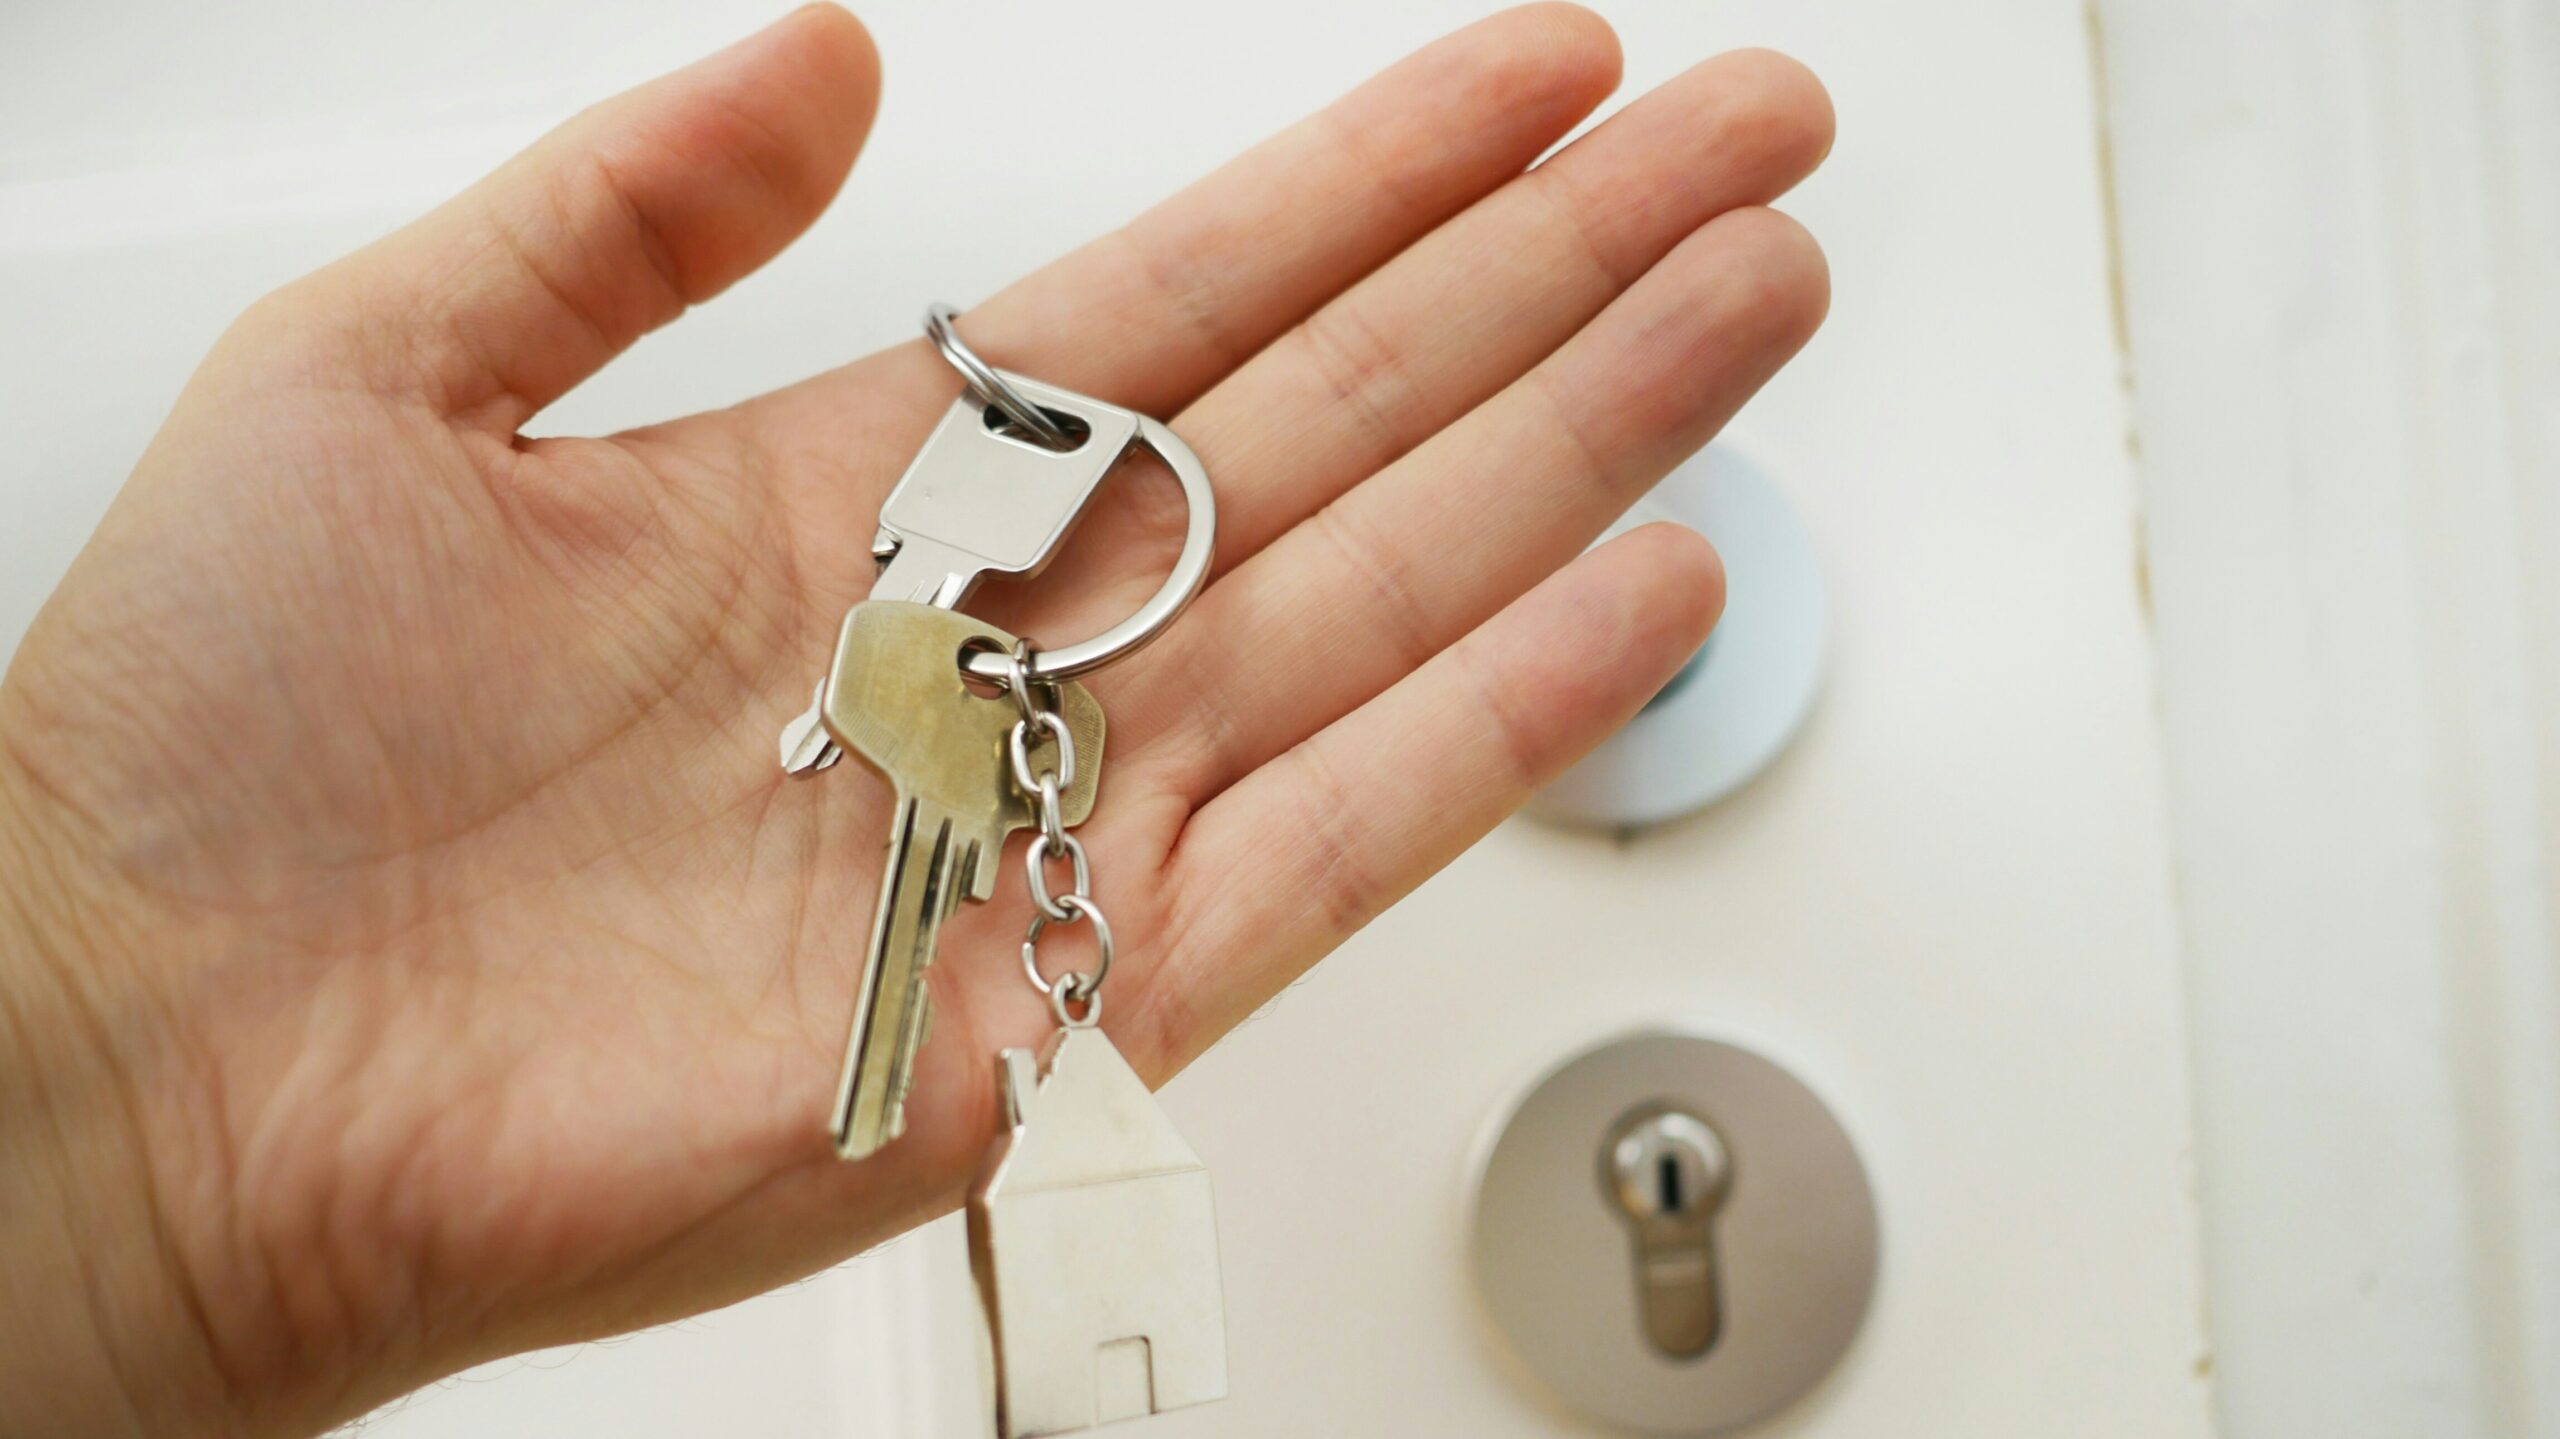 cybersecruty in real estate a male hand holding a golden key chaing with two keys and a house figure in front of white door